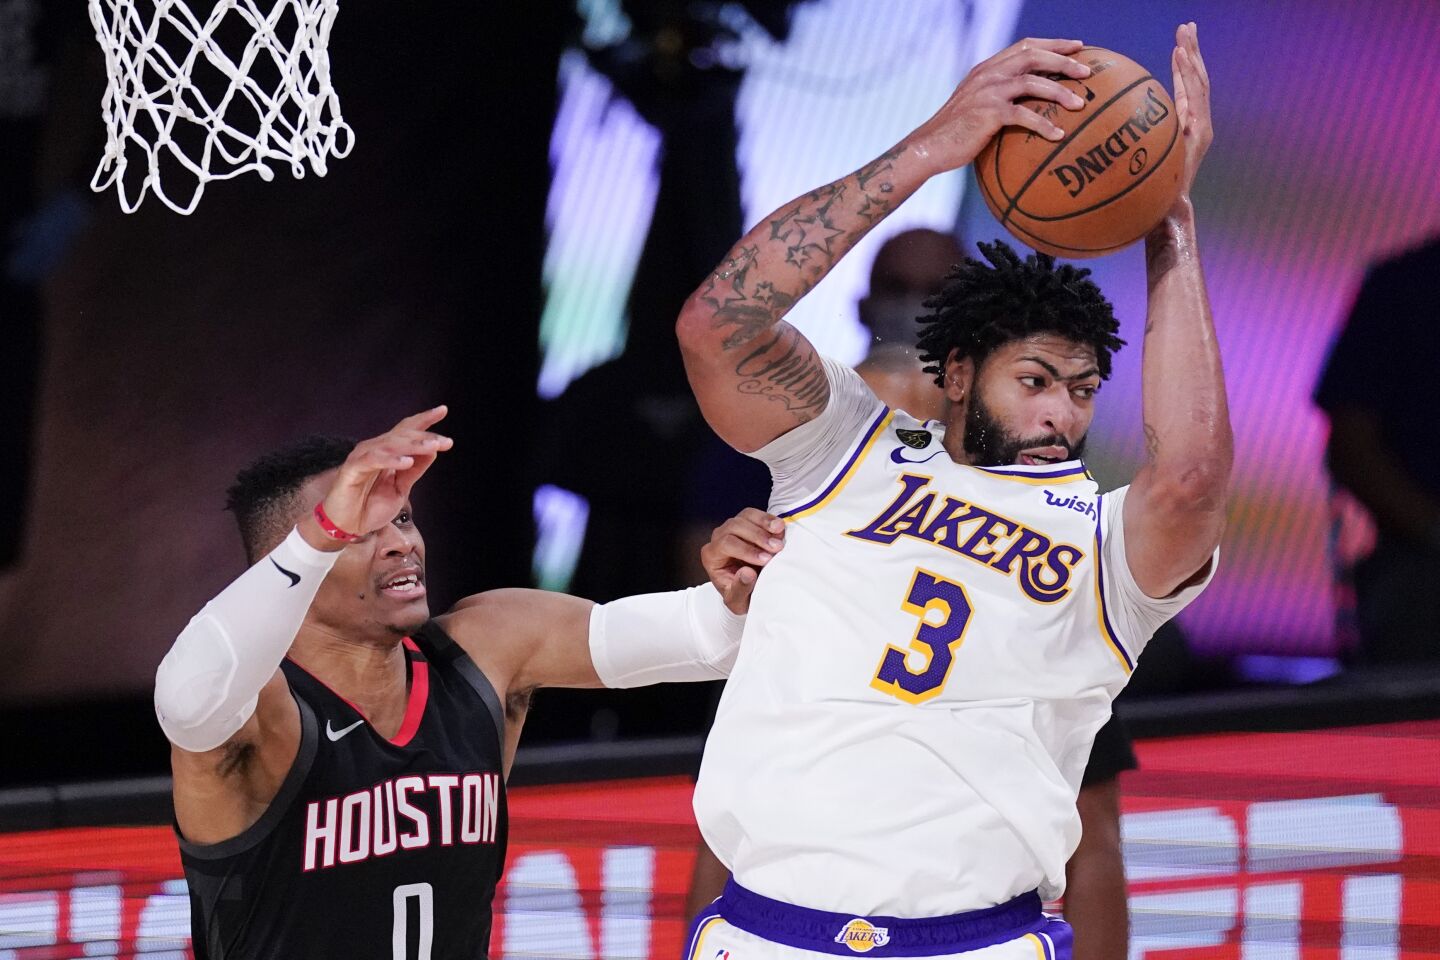 The Lakers' Anthony Davis grabs a rebound over the Rockets' Russell Westbrook during the second half.